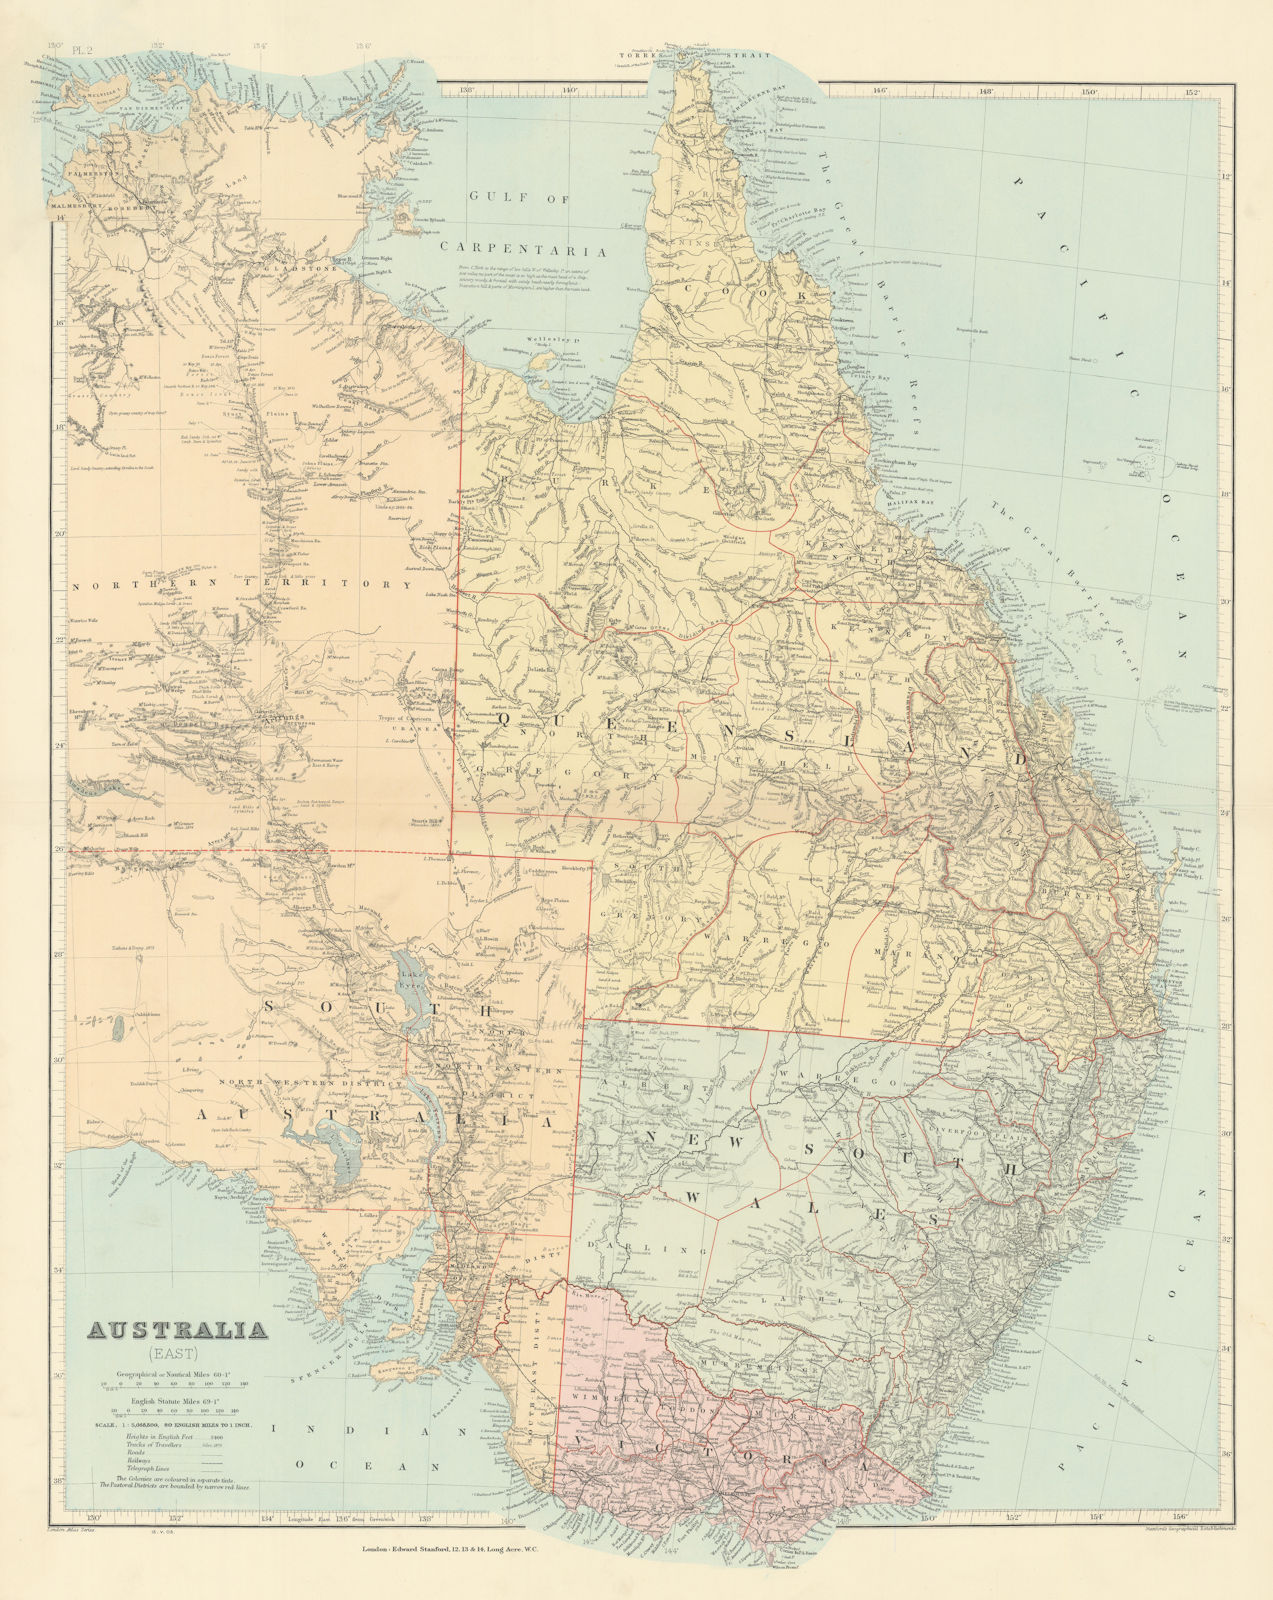 Associate Product Eastern Australia. New South Wales Victoria Queensland. STANFORD 1904 old map